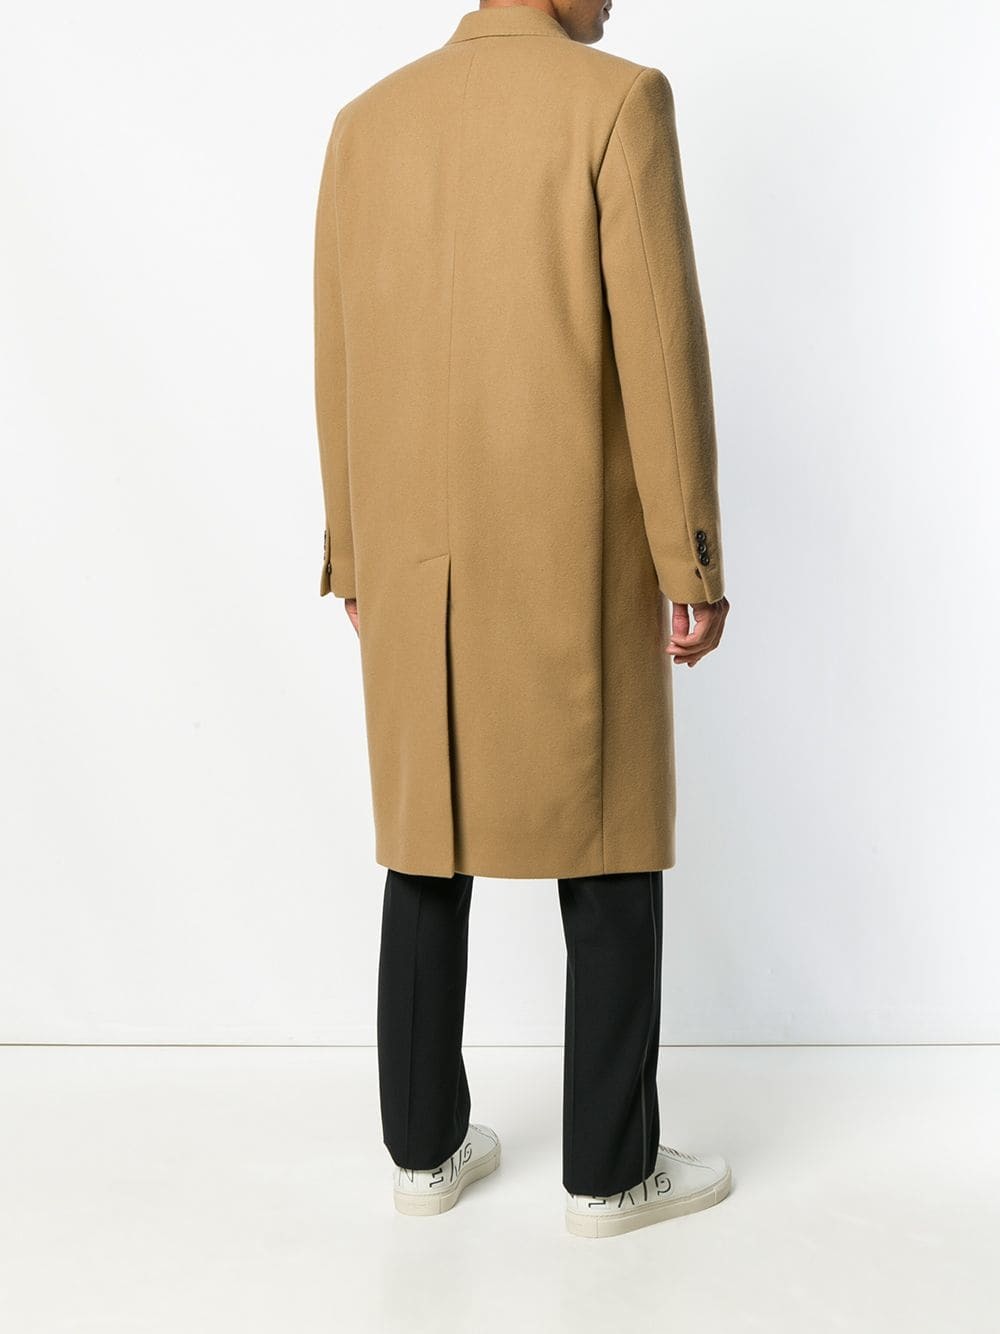 Golden Goose Deluxe Brand Double Breasted Fitted Coat, $1,026 ...